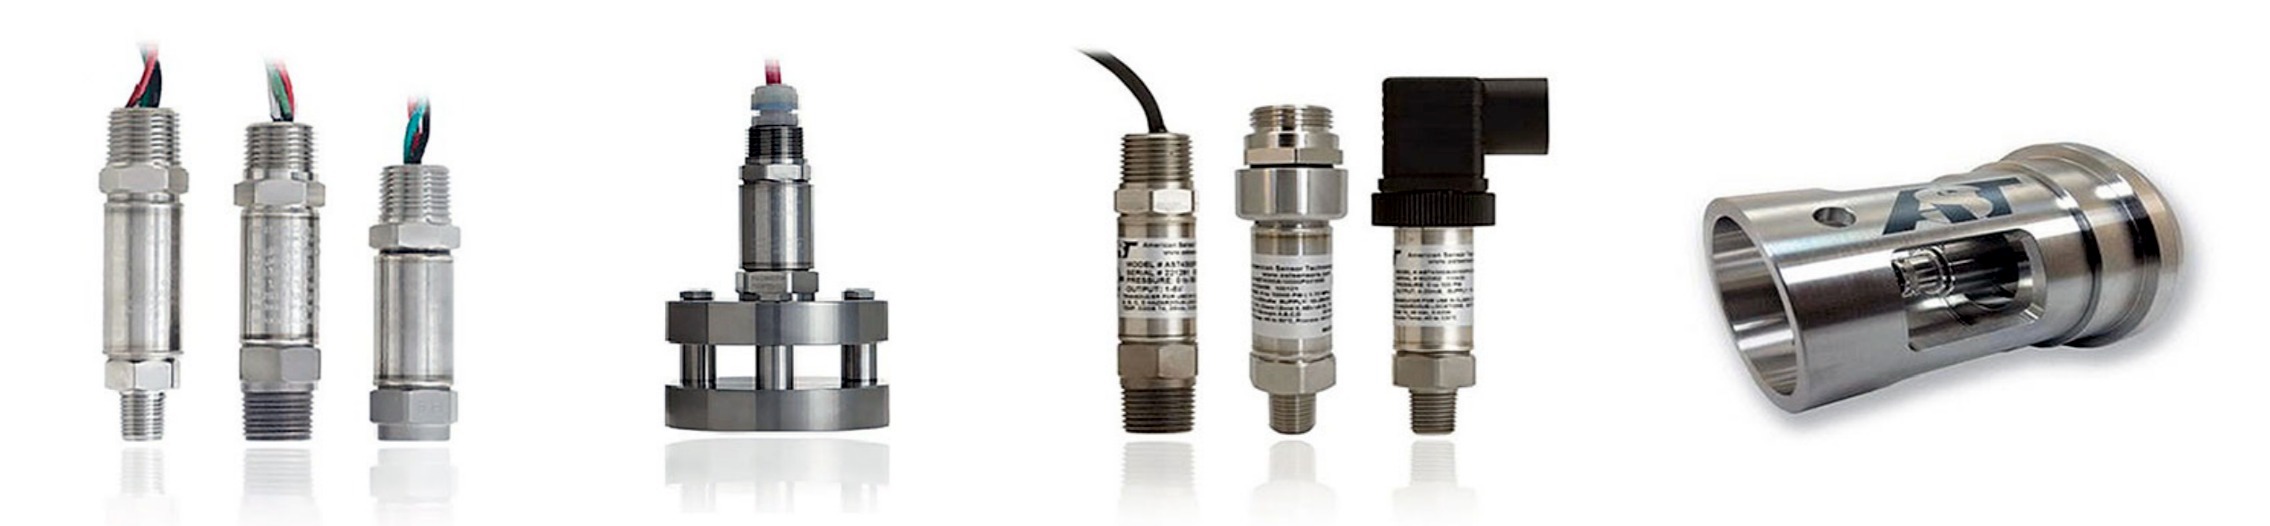 TE Connectivity sensors for oil and gas industry